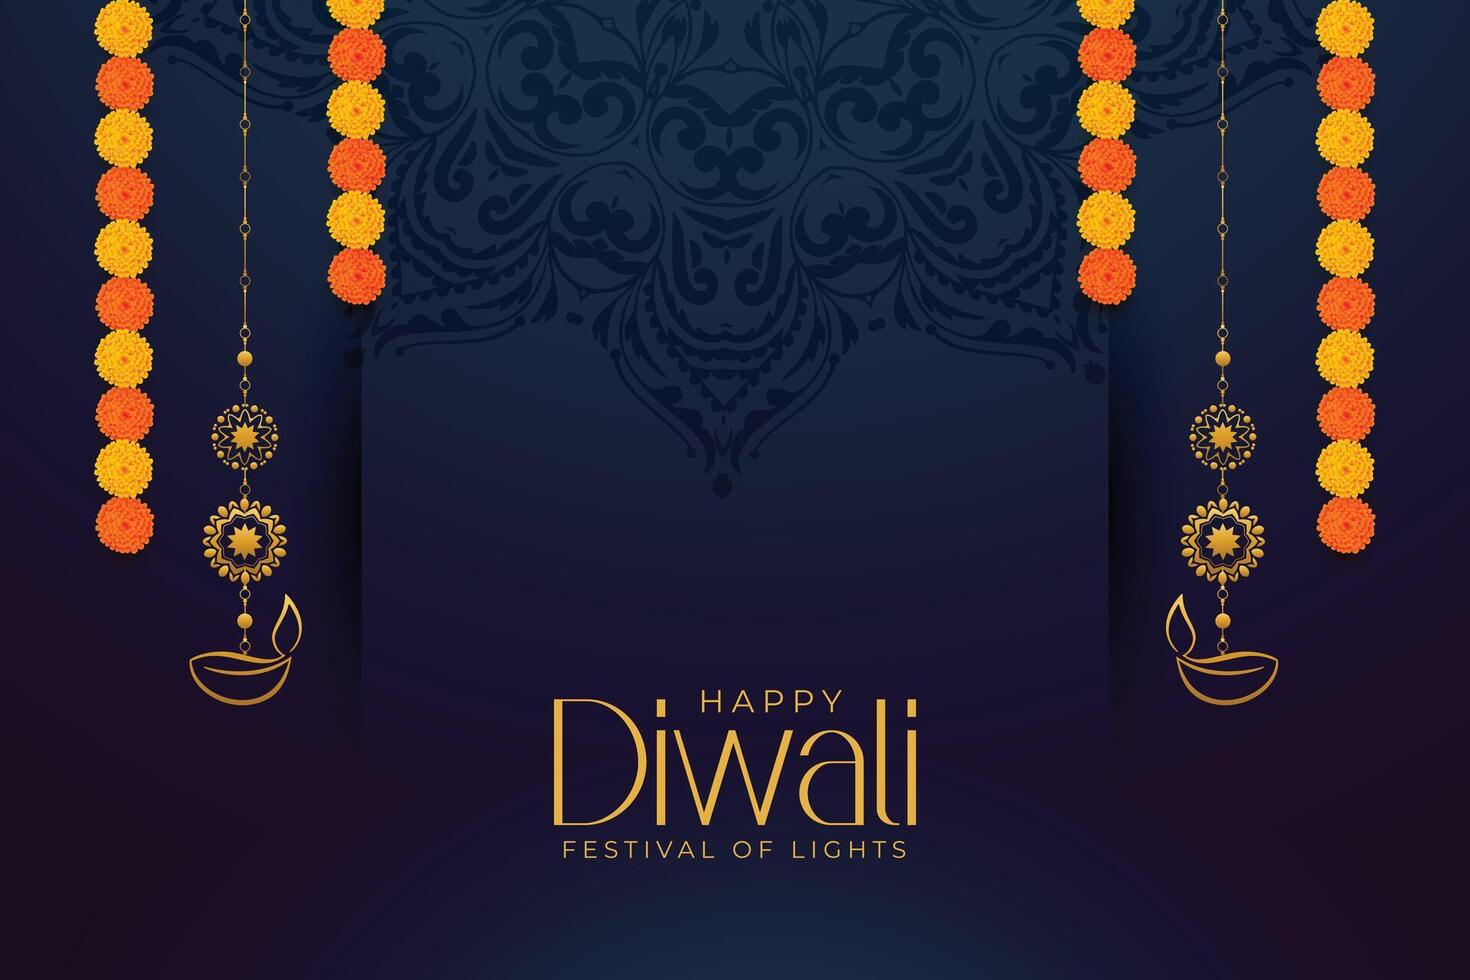 premium shubh diwali greeting card with lantern and flowers design vector